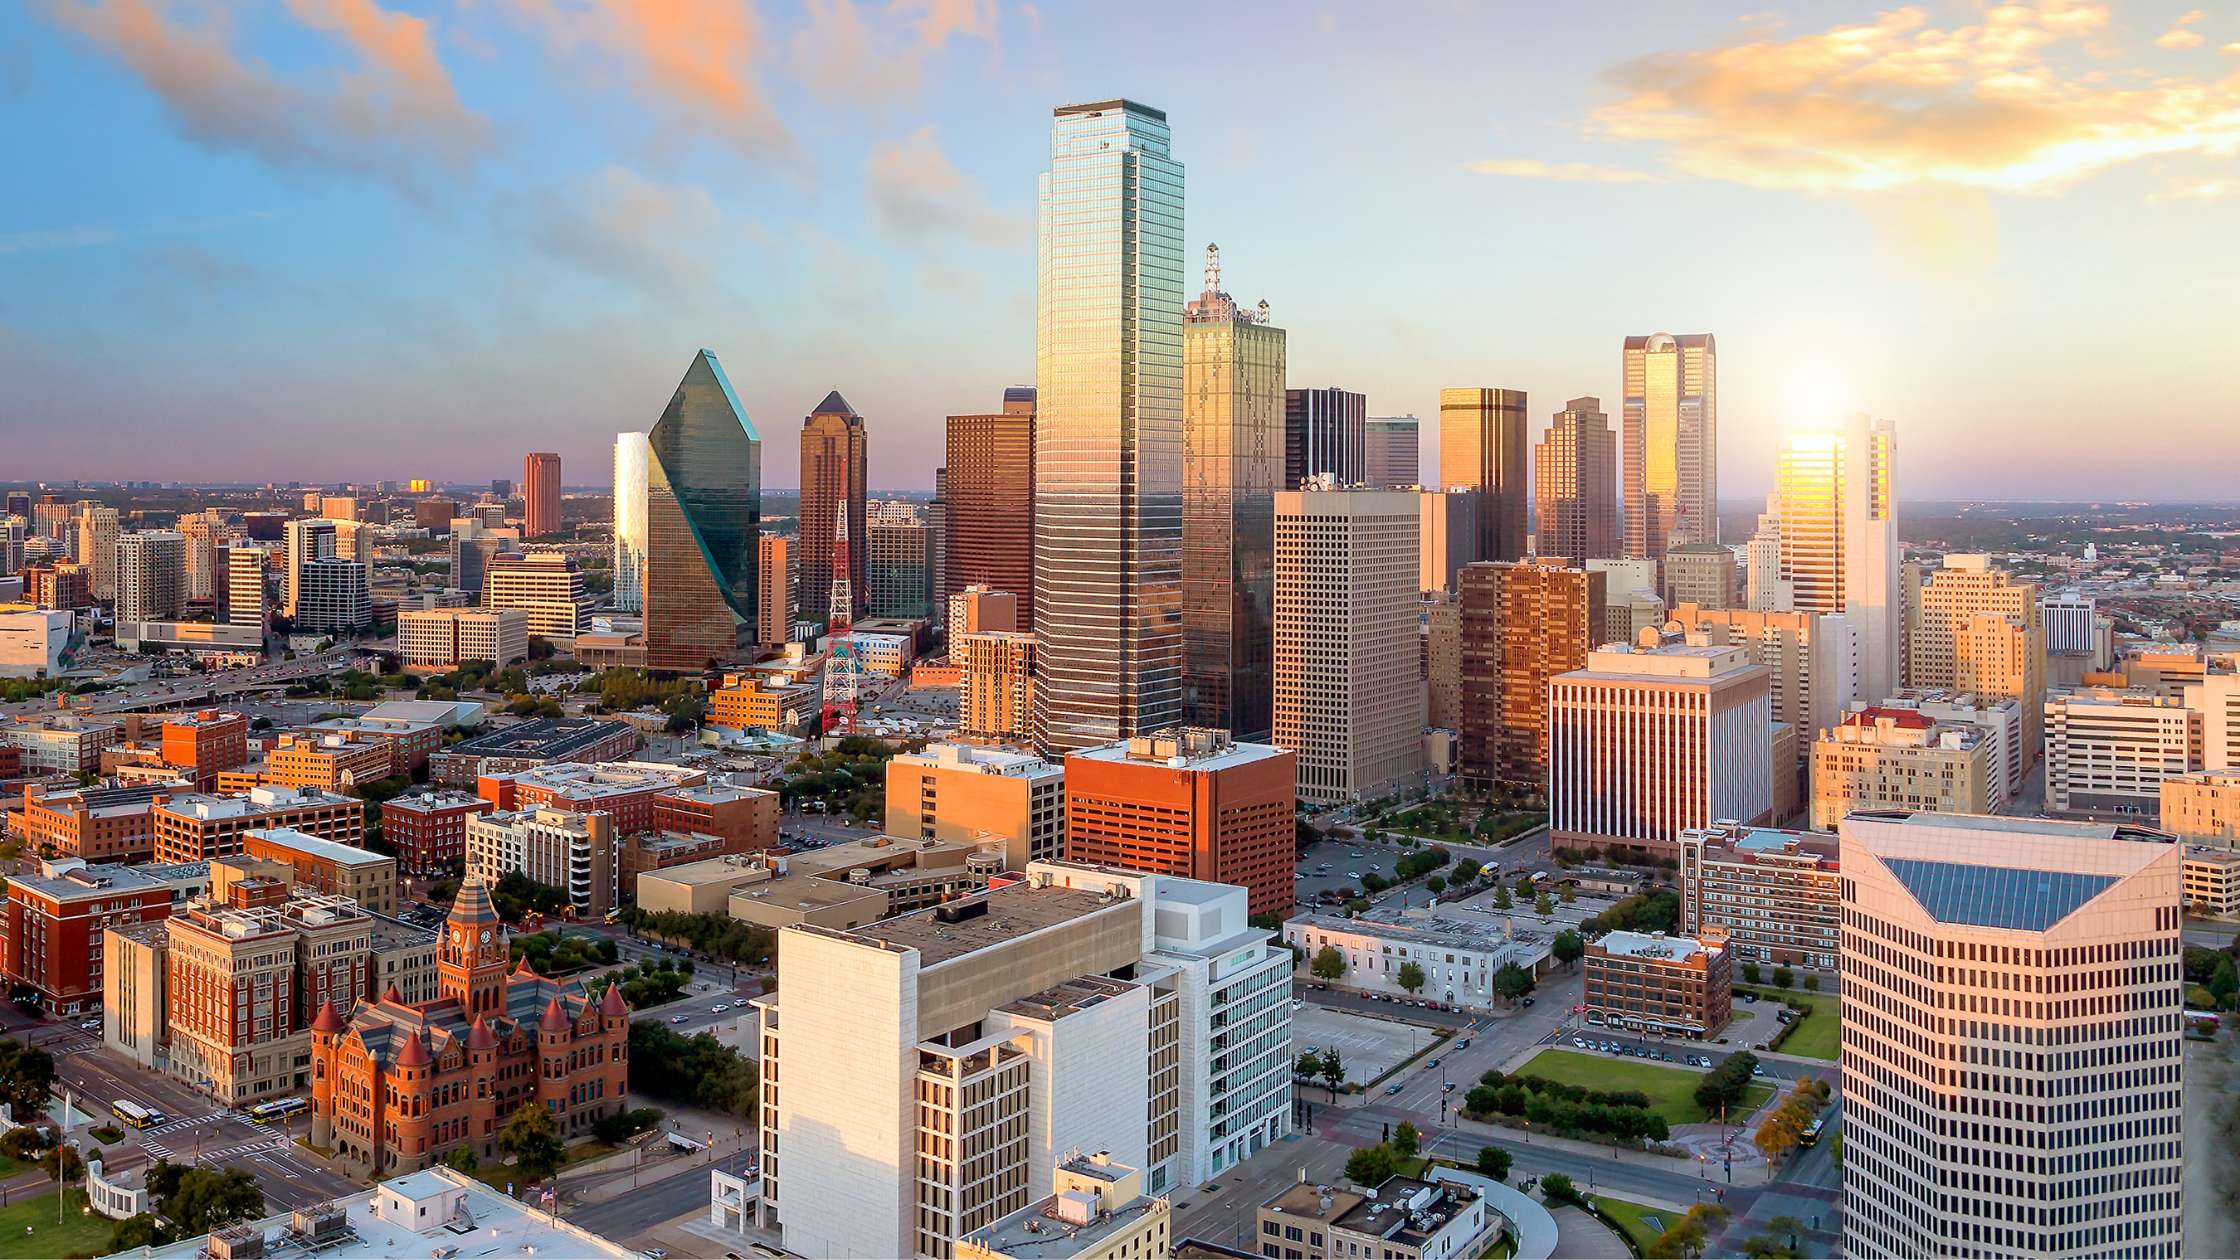 Hire private TRANSPORTATION IN DALLAS from DFW Black Car & Limo to explore the city landmarks, shop, and dine without stress or hassles during your vacation.